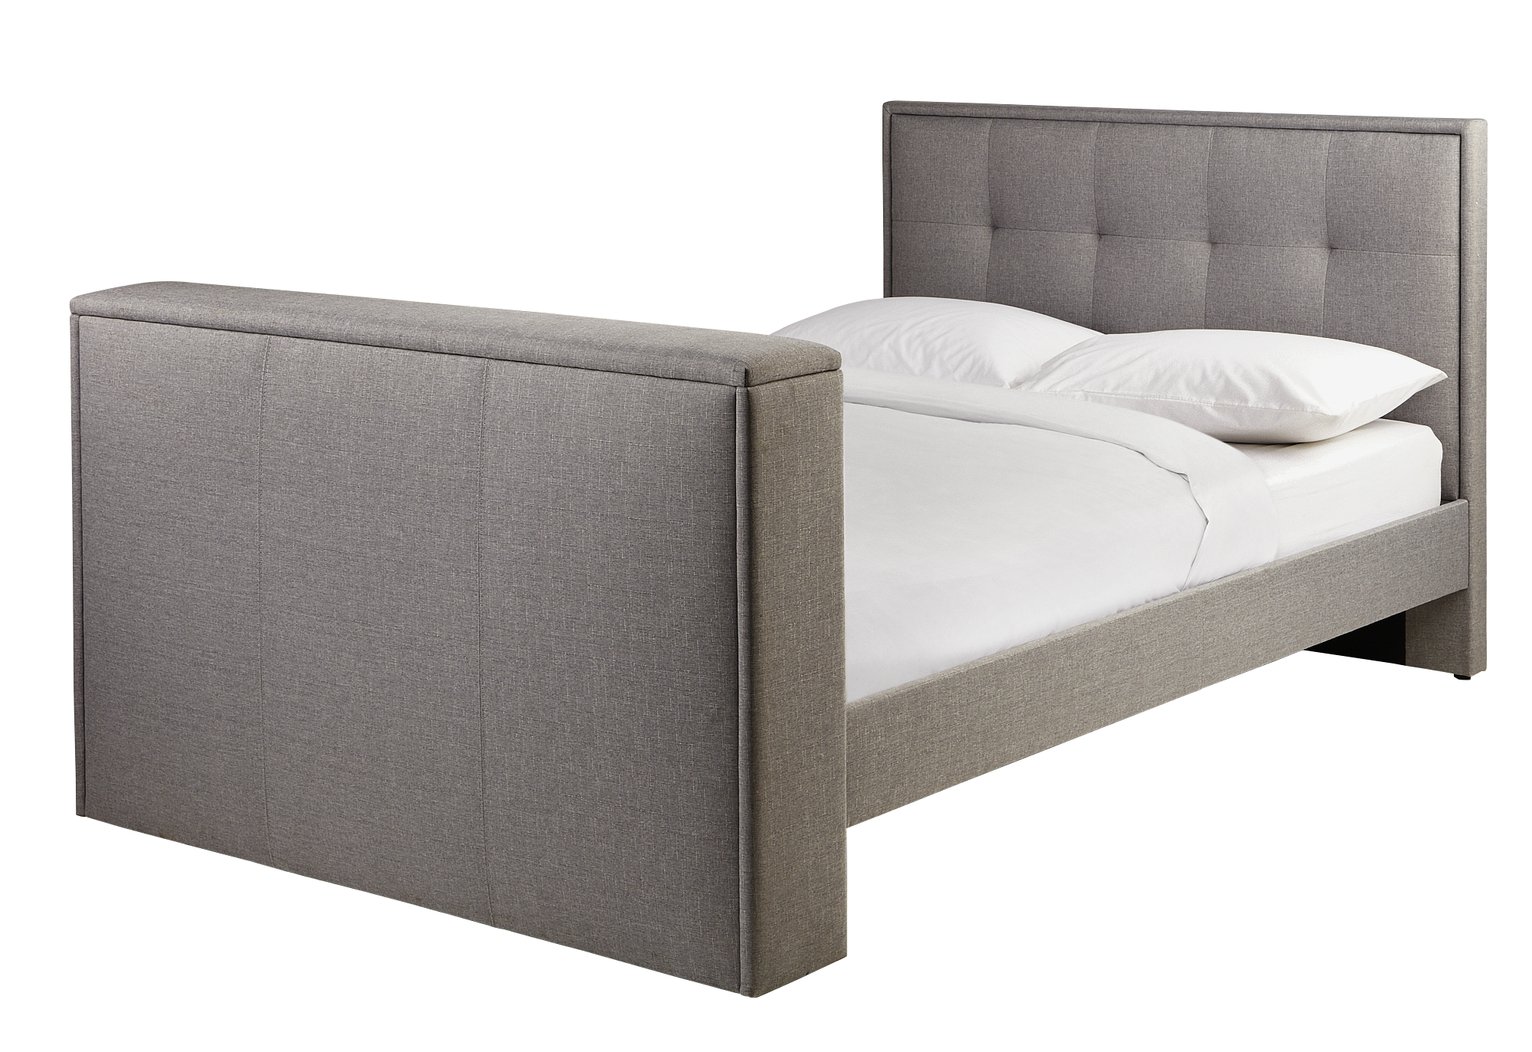 Argos Home Forsyth Double TV Bed Frame Review